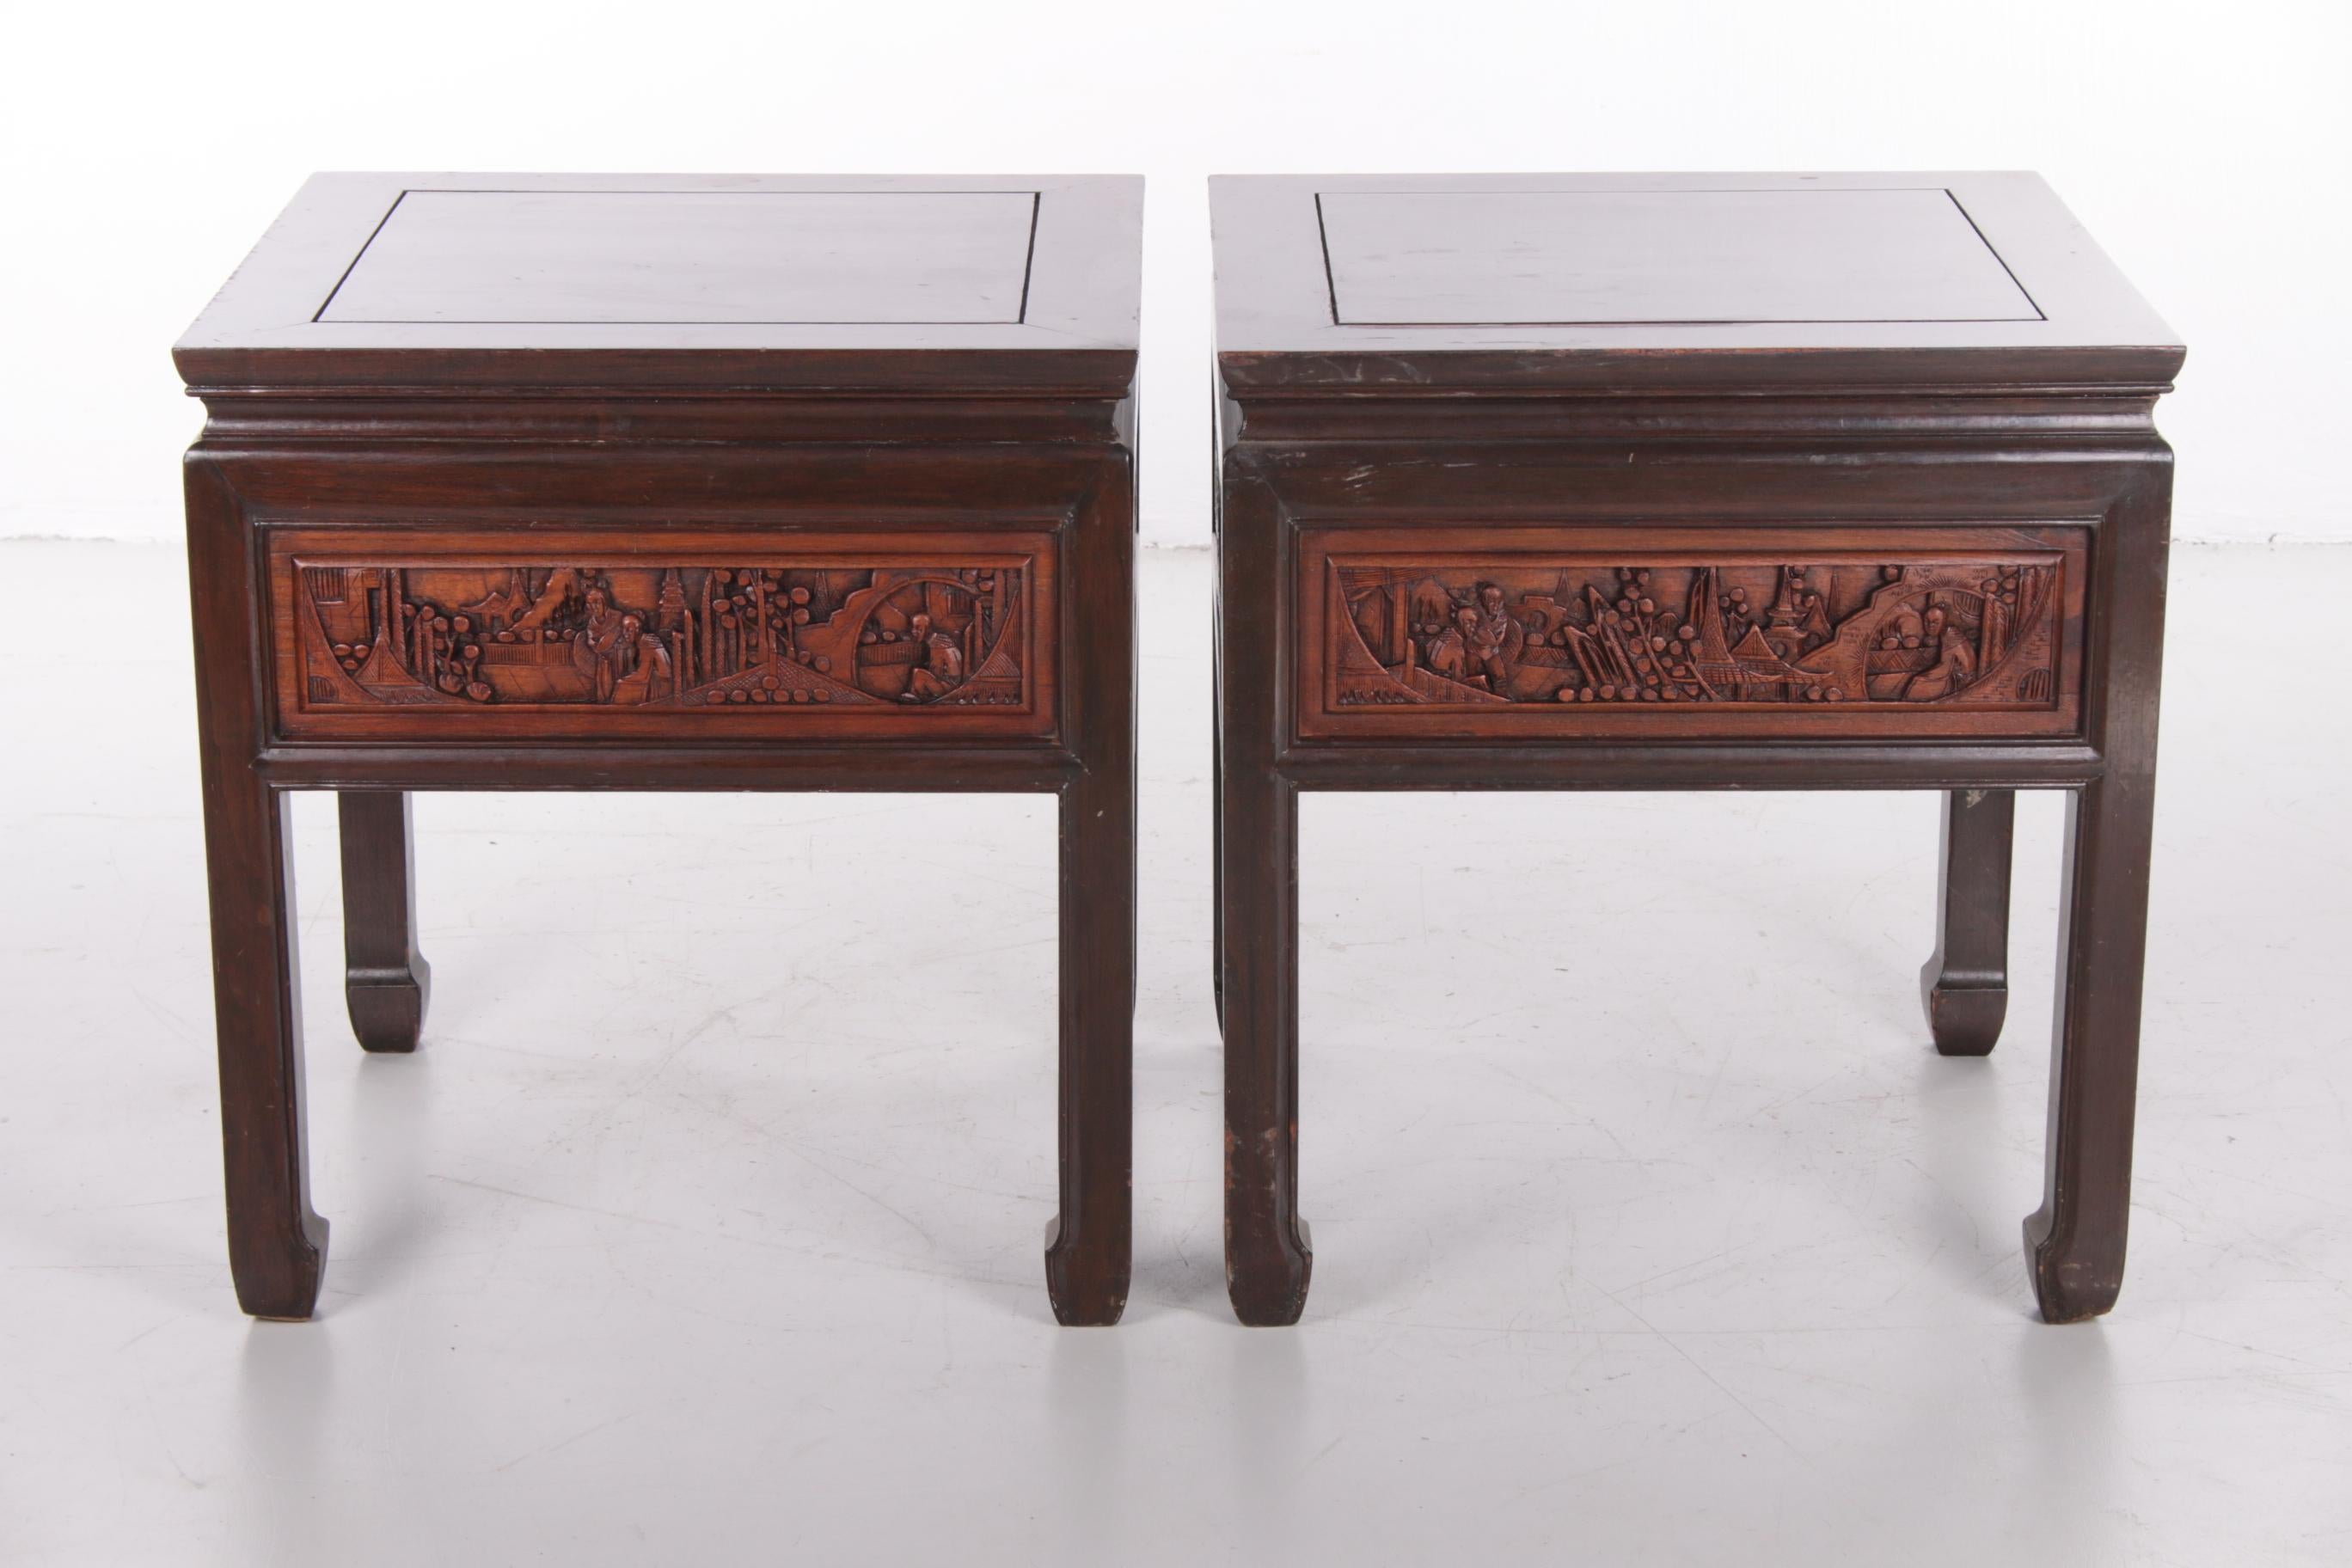 20th Century Chinese Wooden Bedside Tables with Beautiful Hand Carving 5